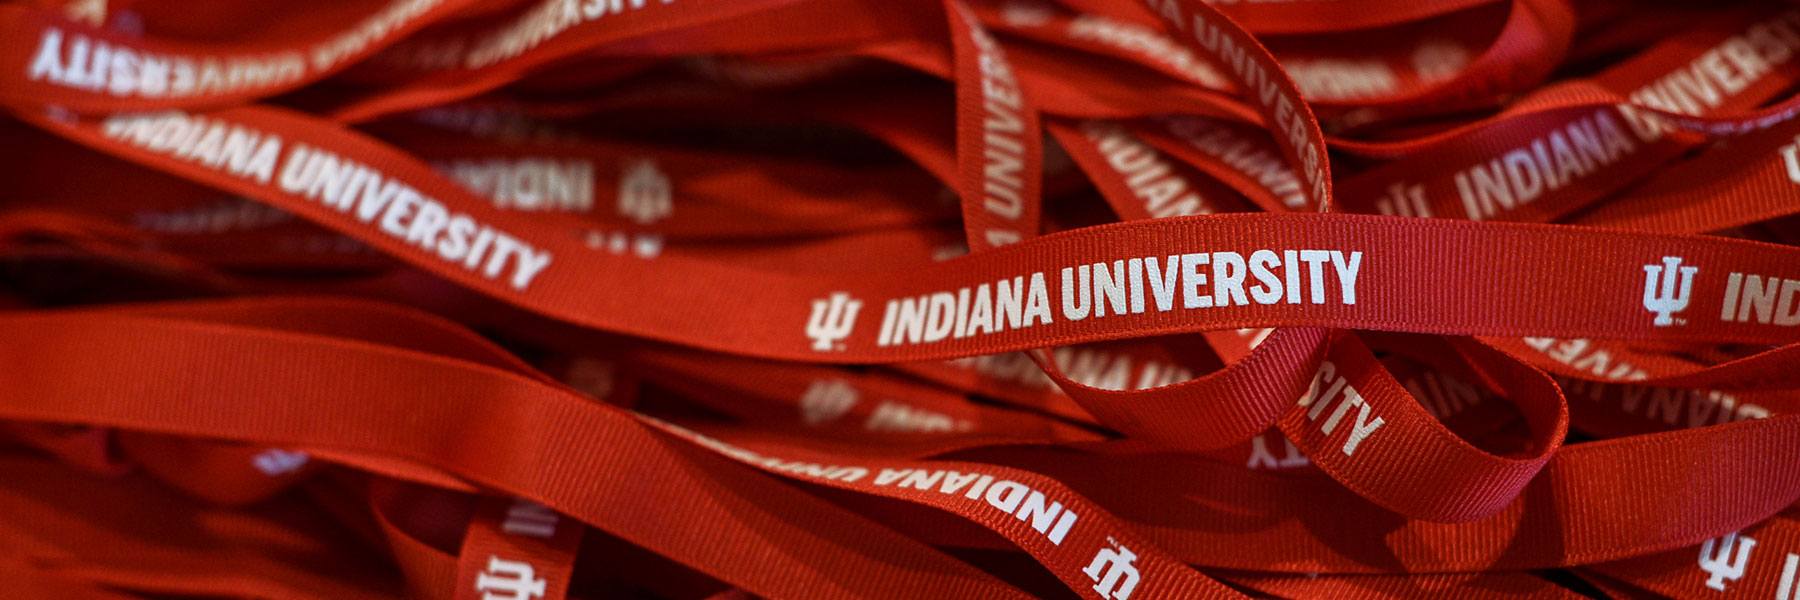 A pile of red lanyards with Indiana University printed on them